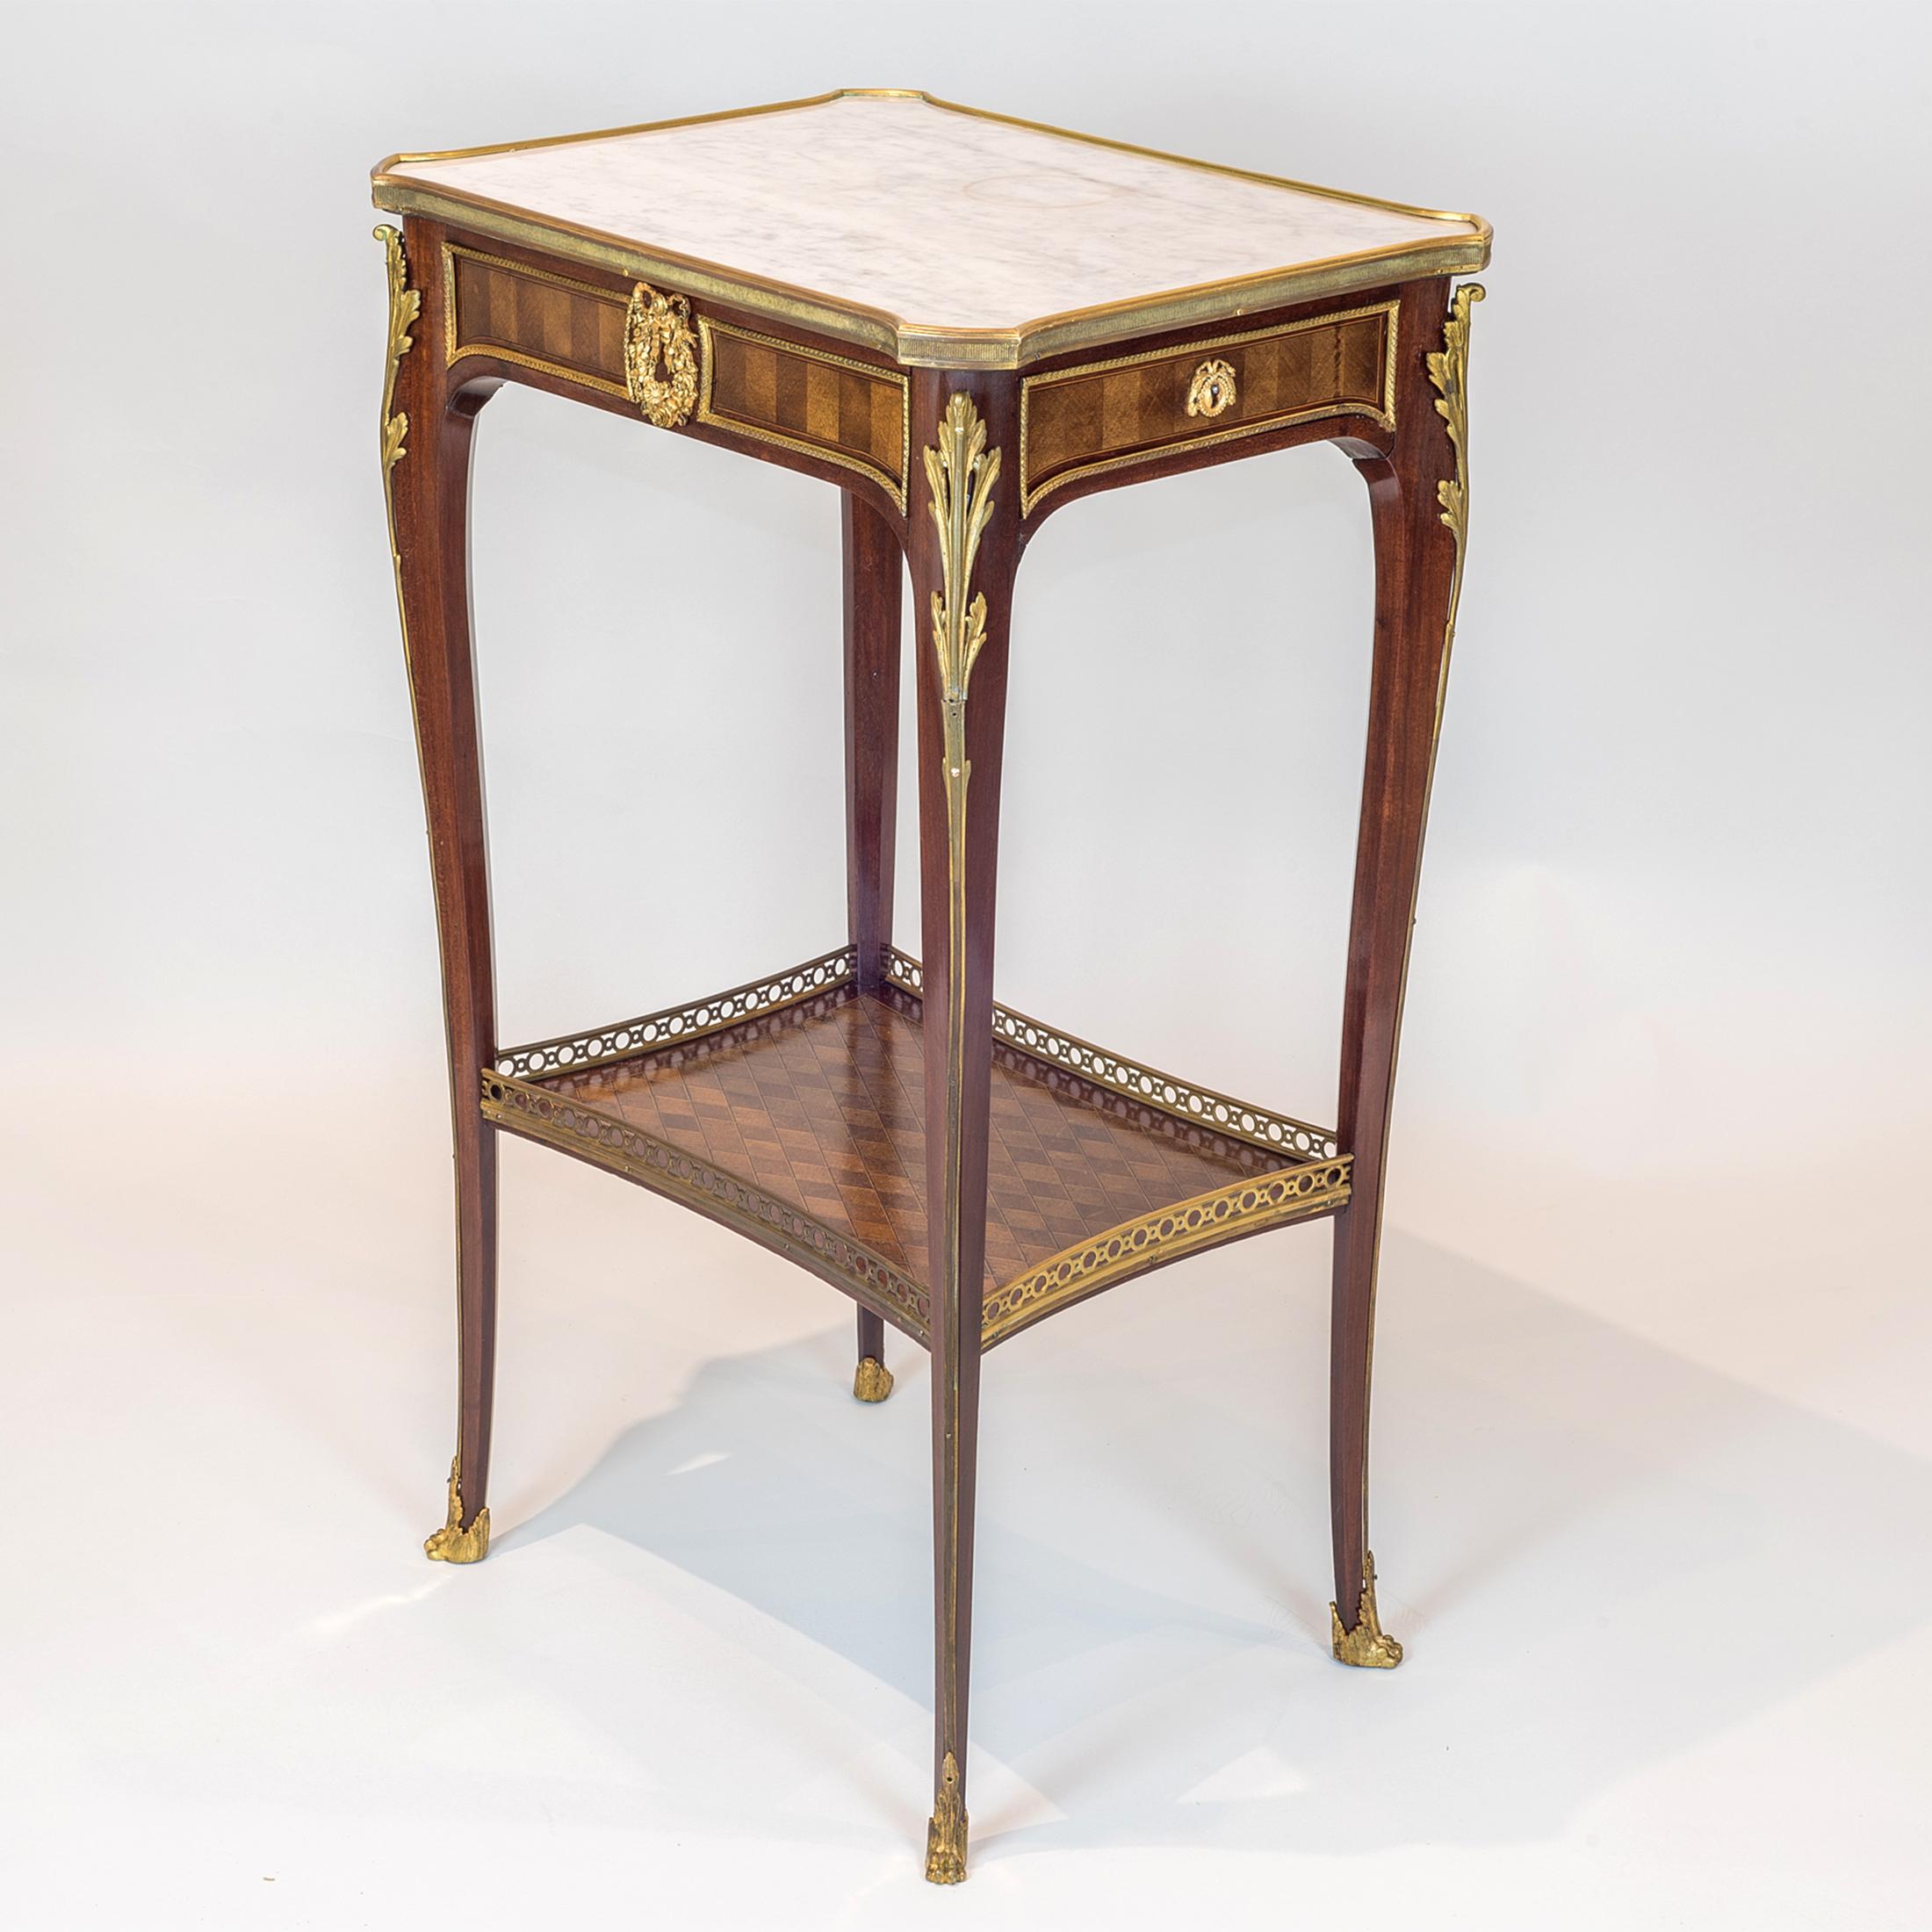 A fine Louis XV-style French Ormolu-mounted mahogany marble-top side table with a side drawer and foliate inlay on cabriole legs.??

Origin: French?
Date: circa 19th century?
Dimension: H 30 1/4 x W 18 1/4 x D 14 inches.